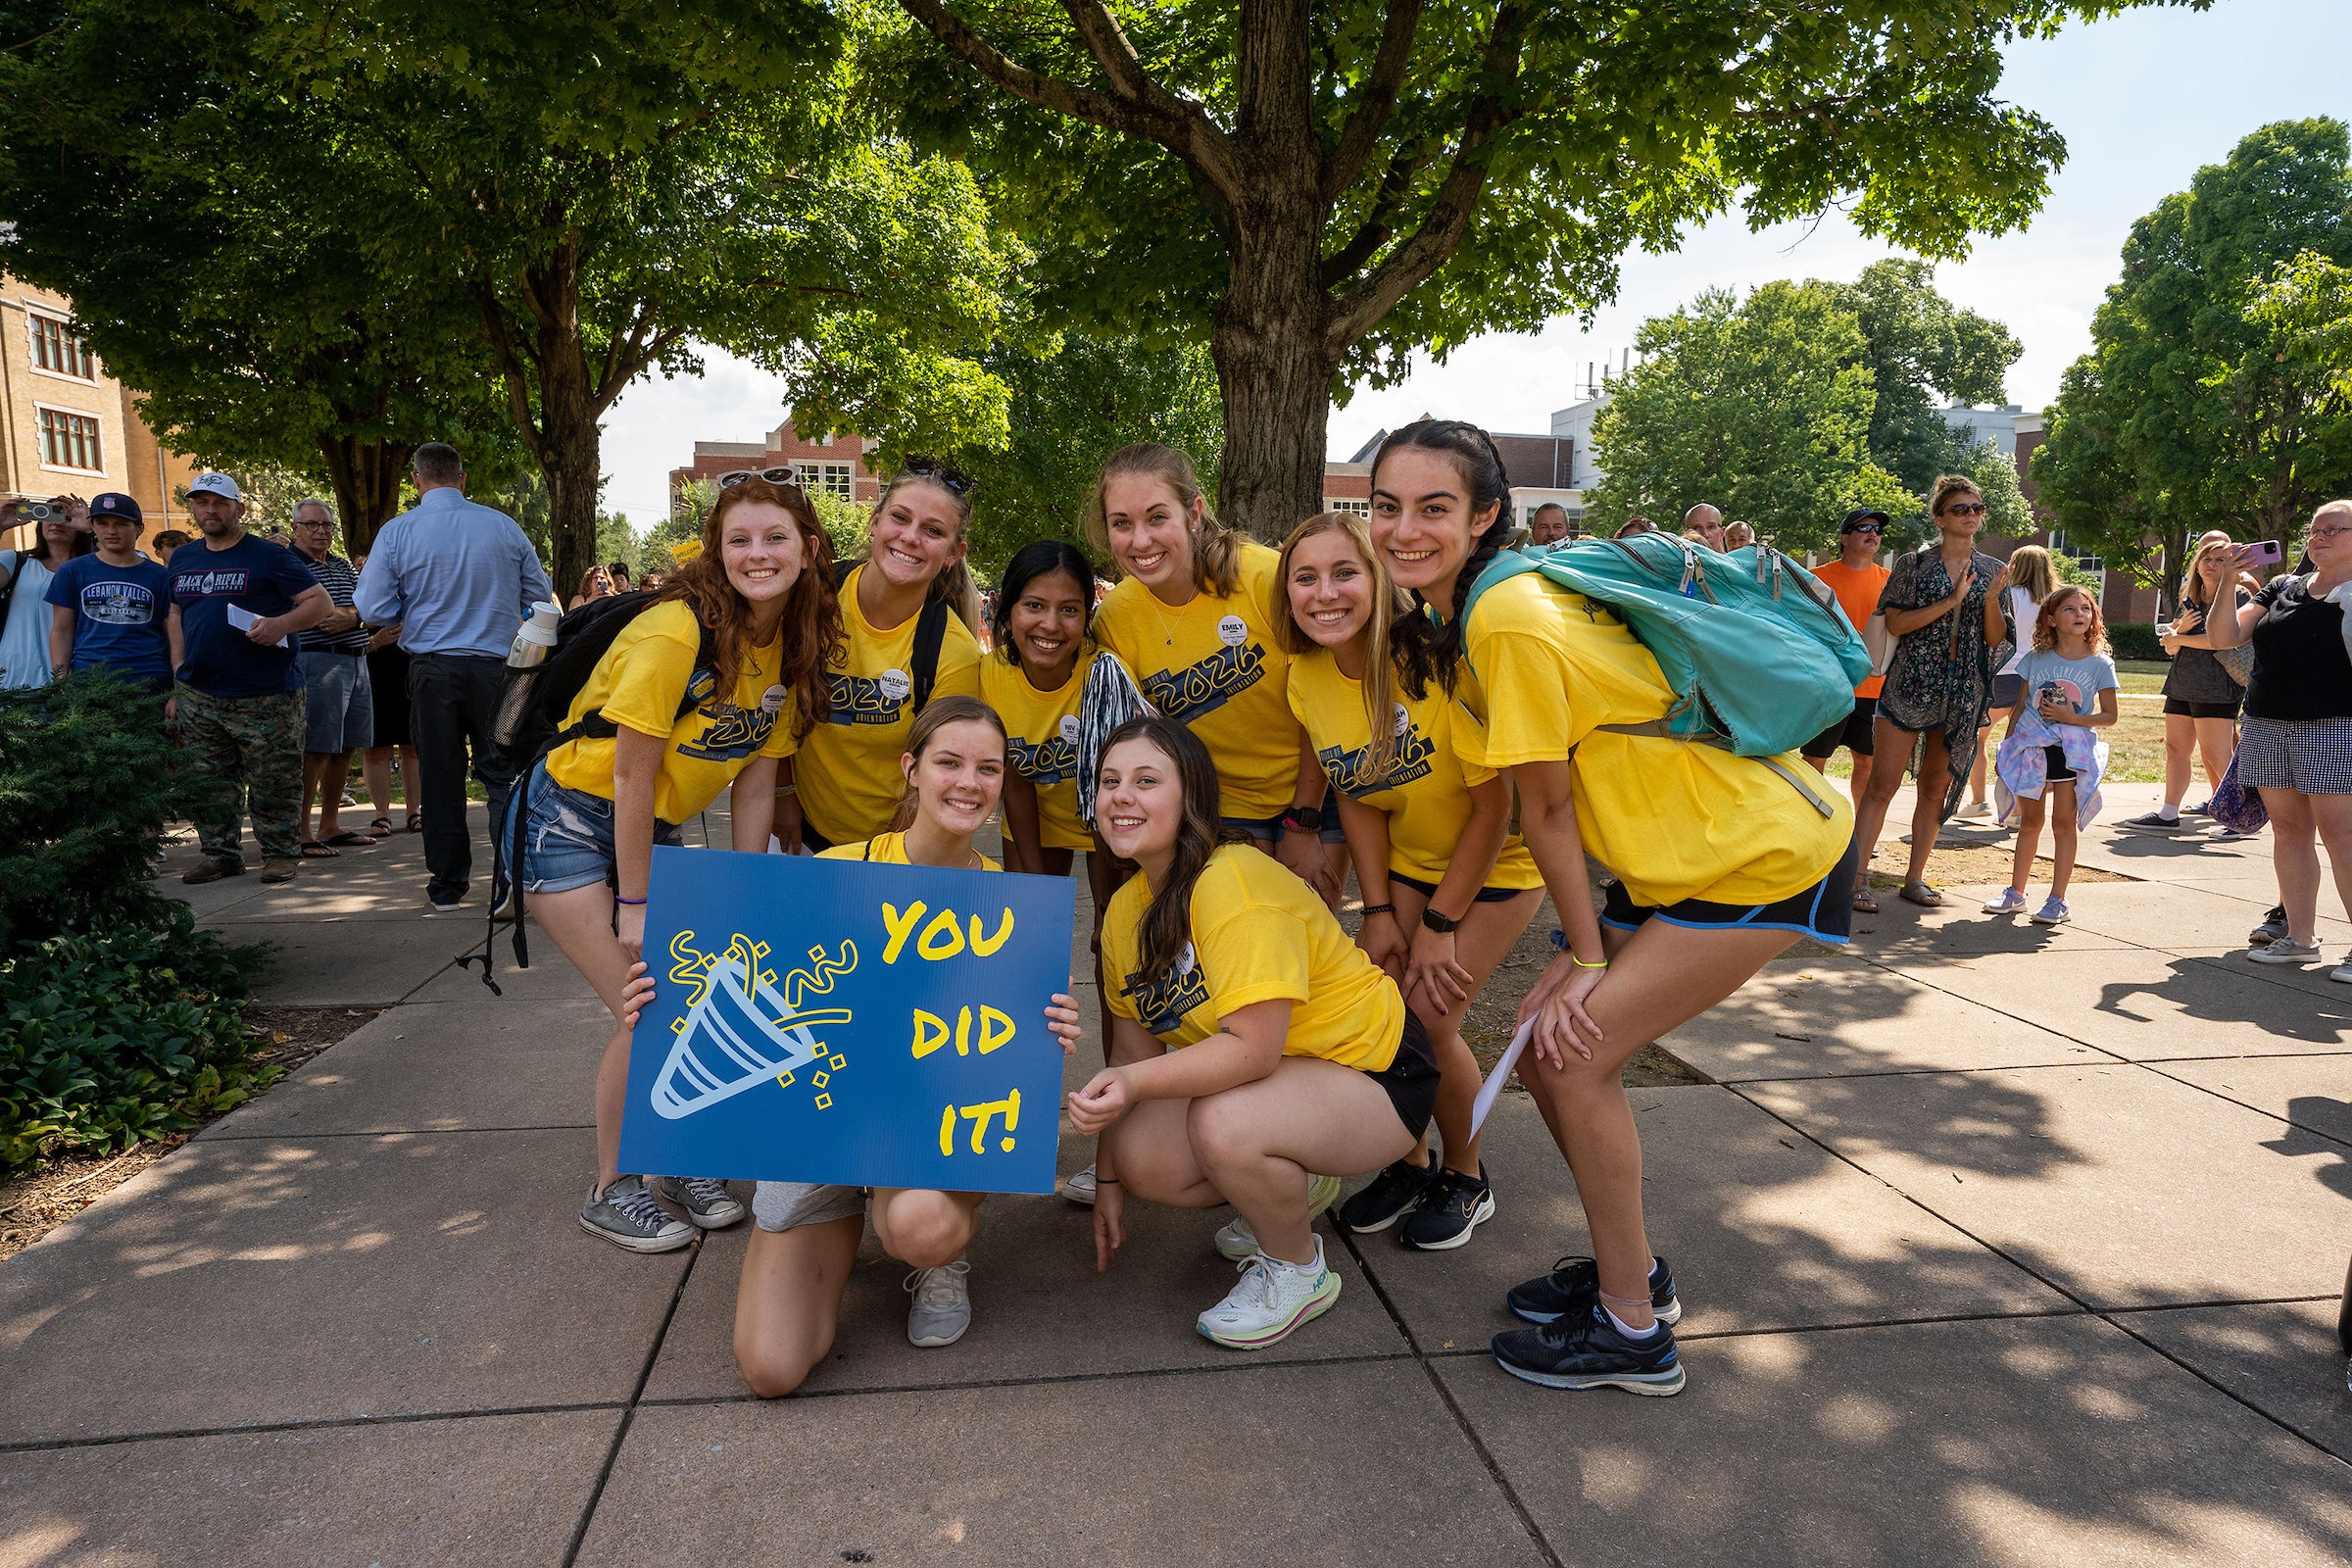 Students pose with sign that says you did it for school spirit in bright yellow shirts